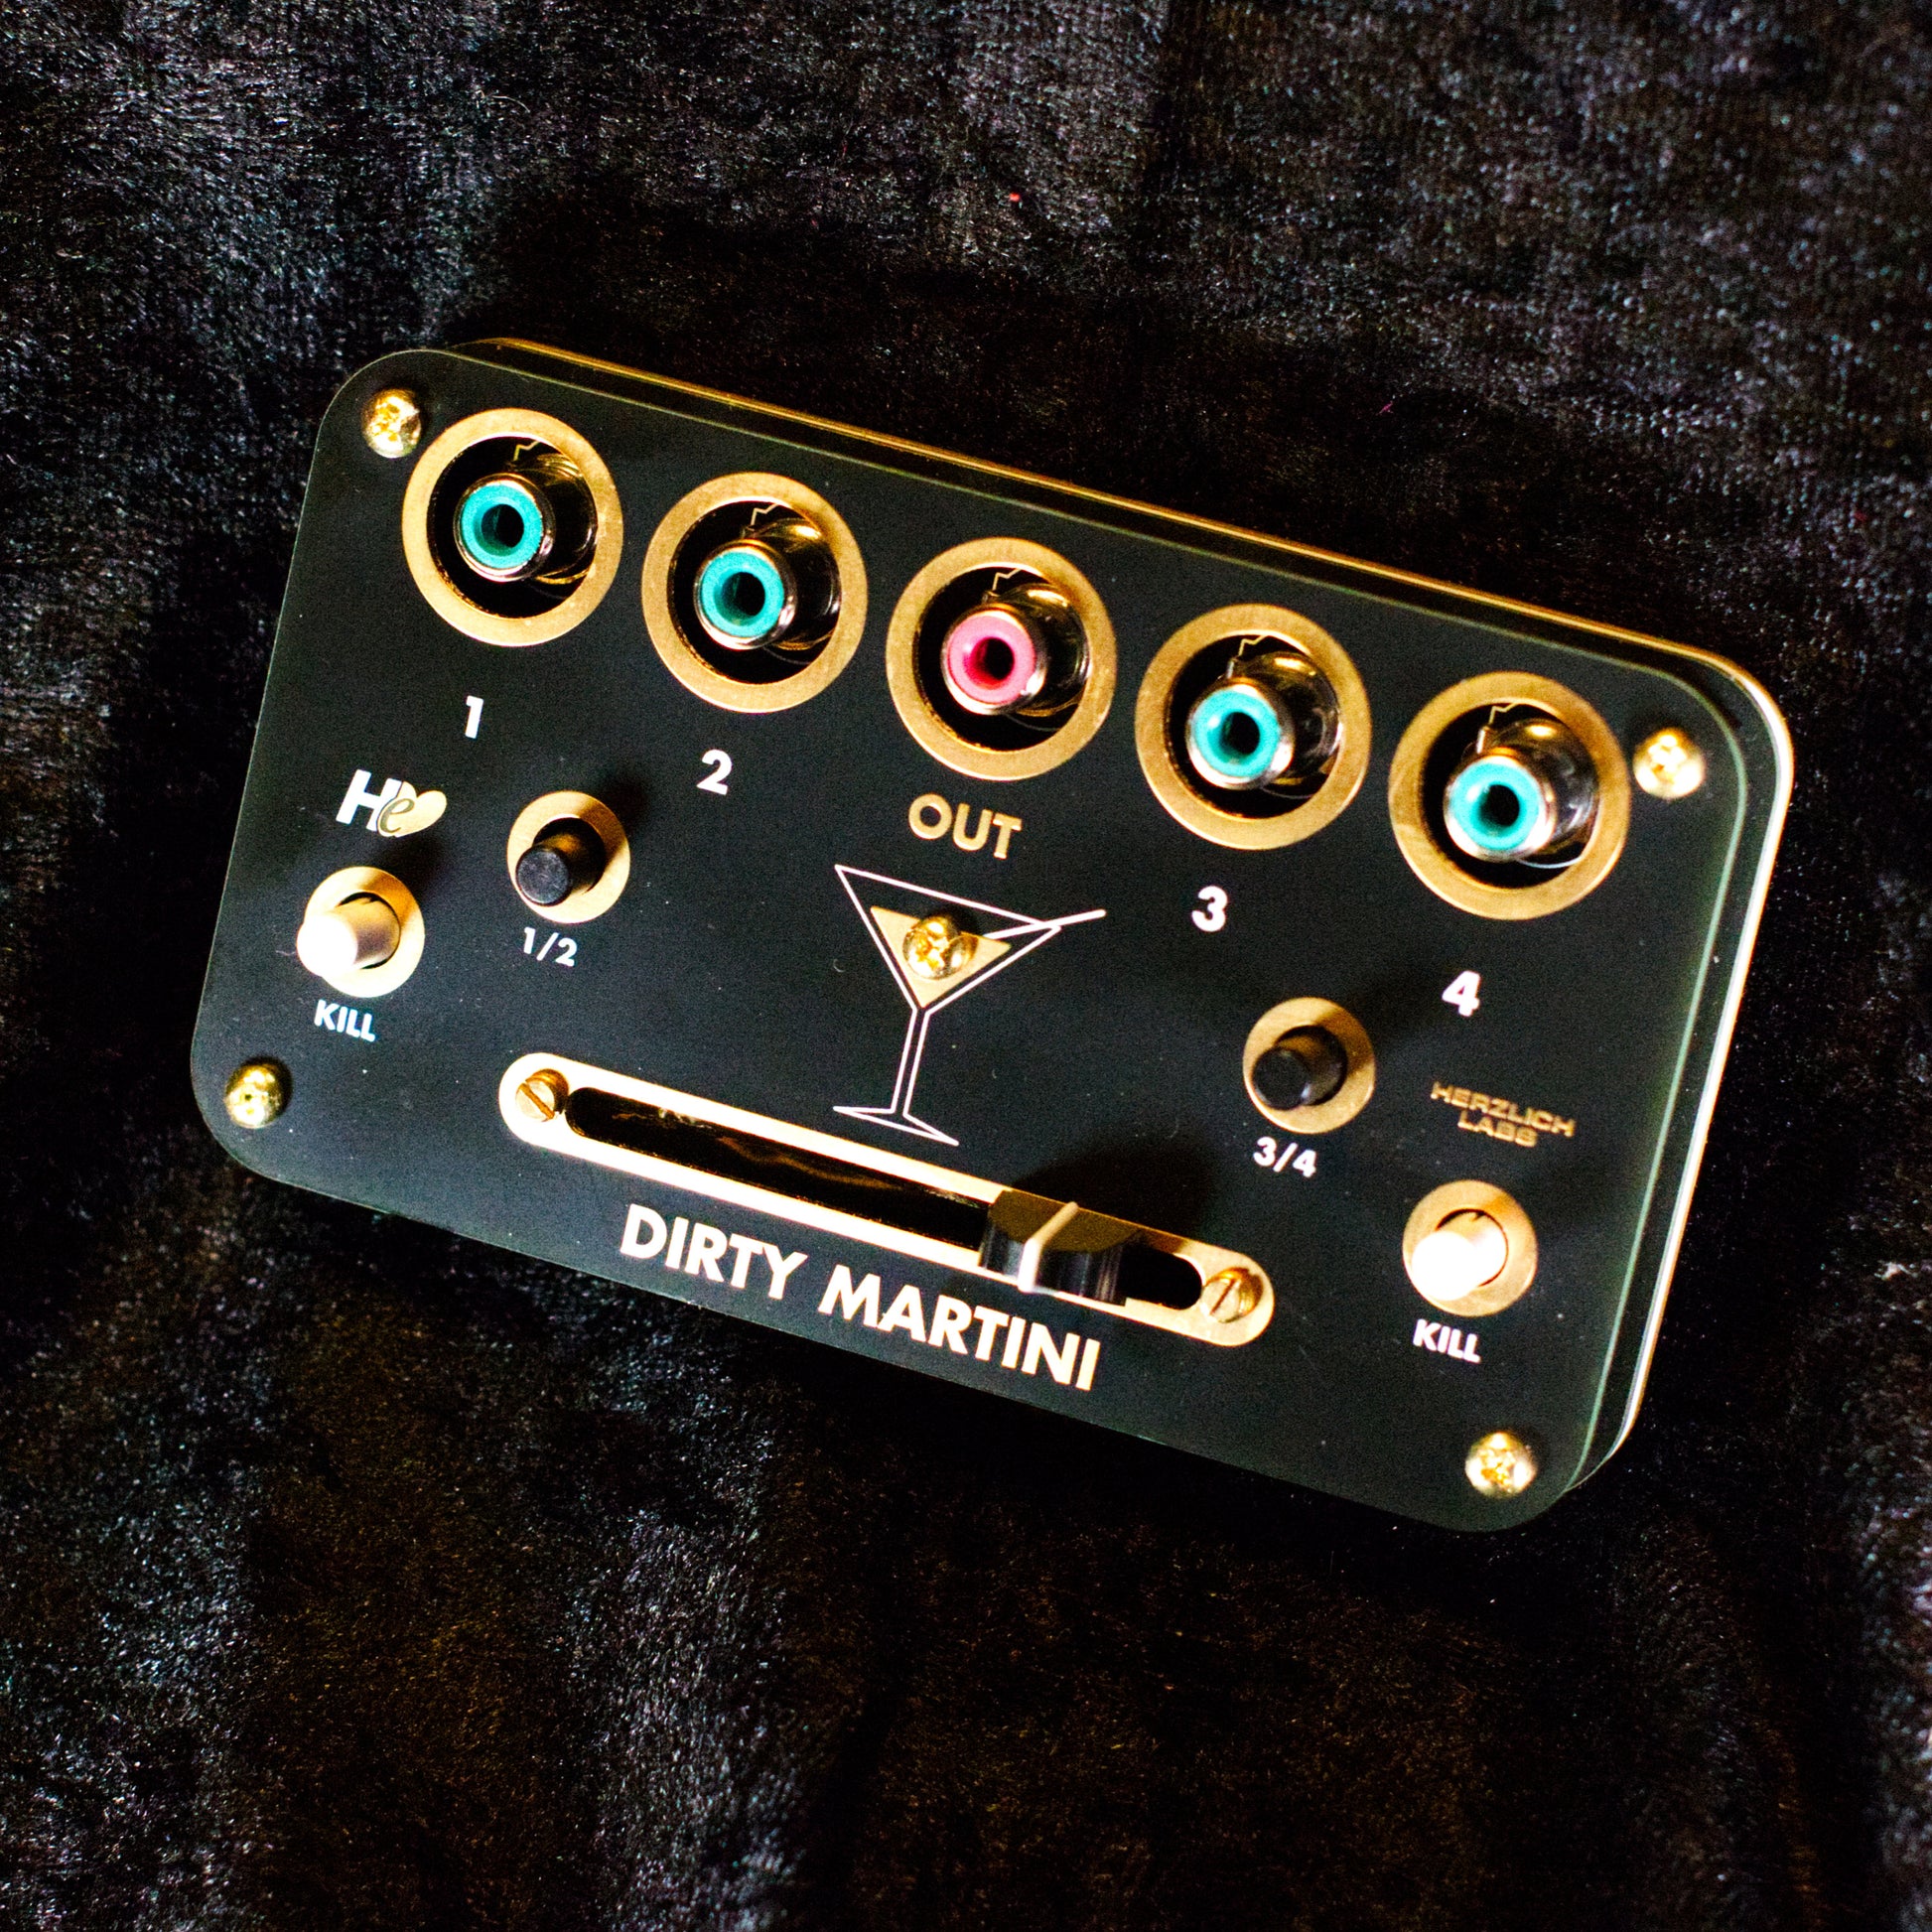 Video Dirty Mixer - Herzlich Labs Dirty Martini - passive glitch mixer for video with fader, 4-input selection and performance switches